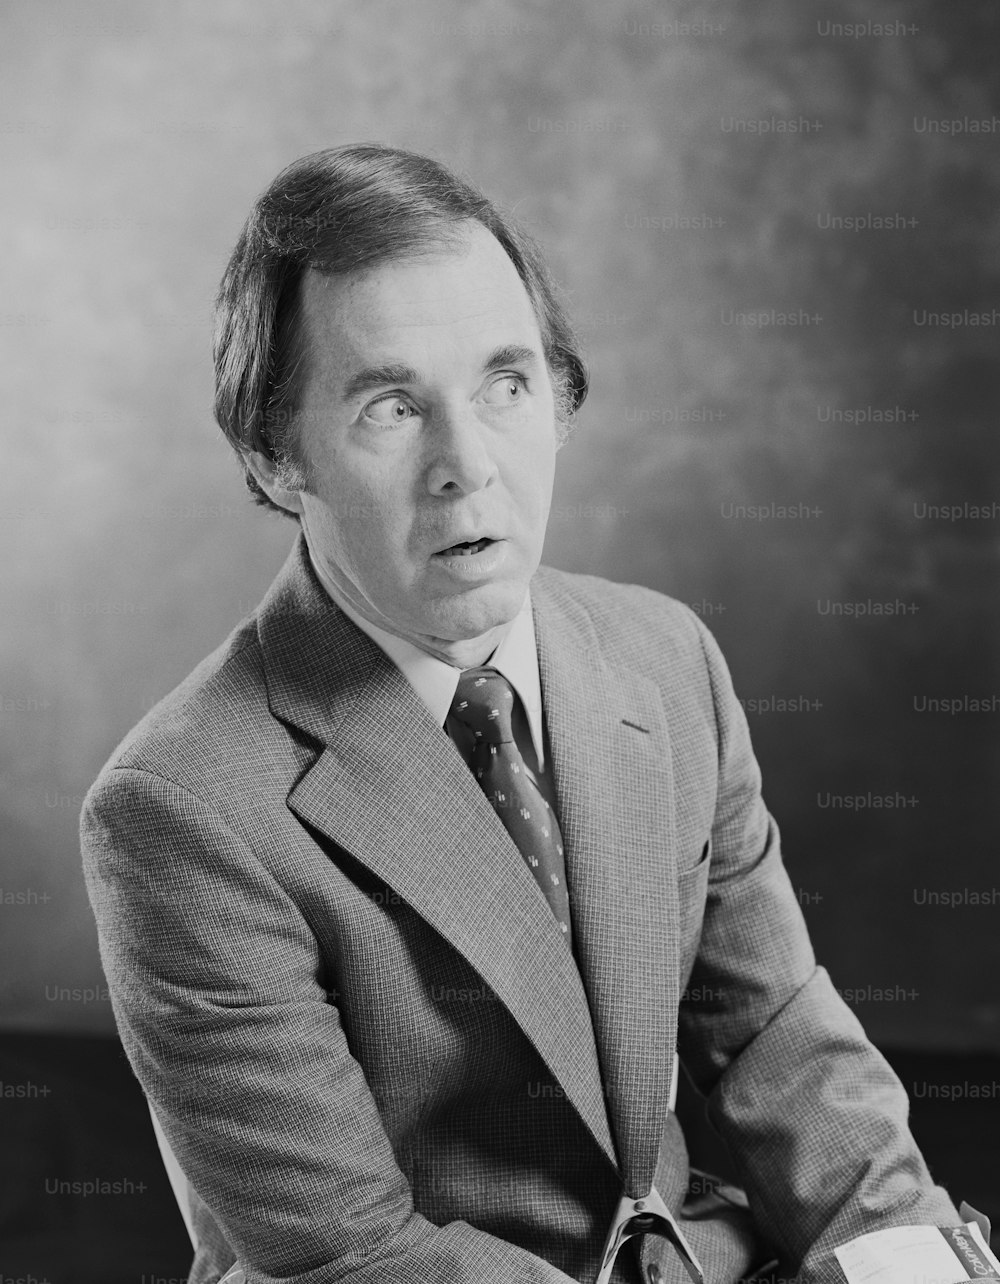 a black and white photo of a man in a suit